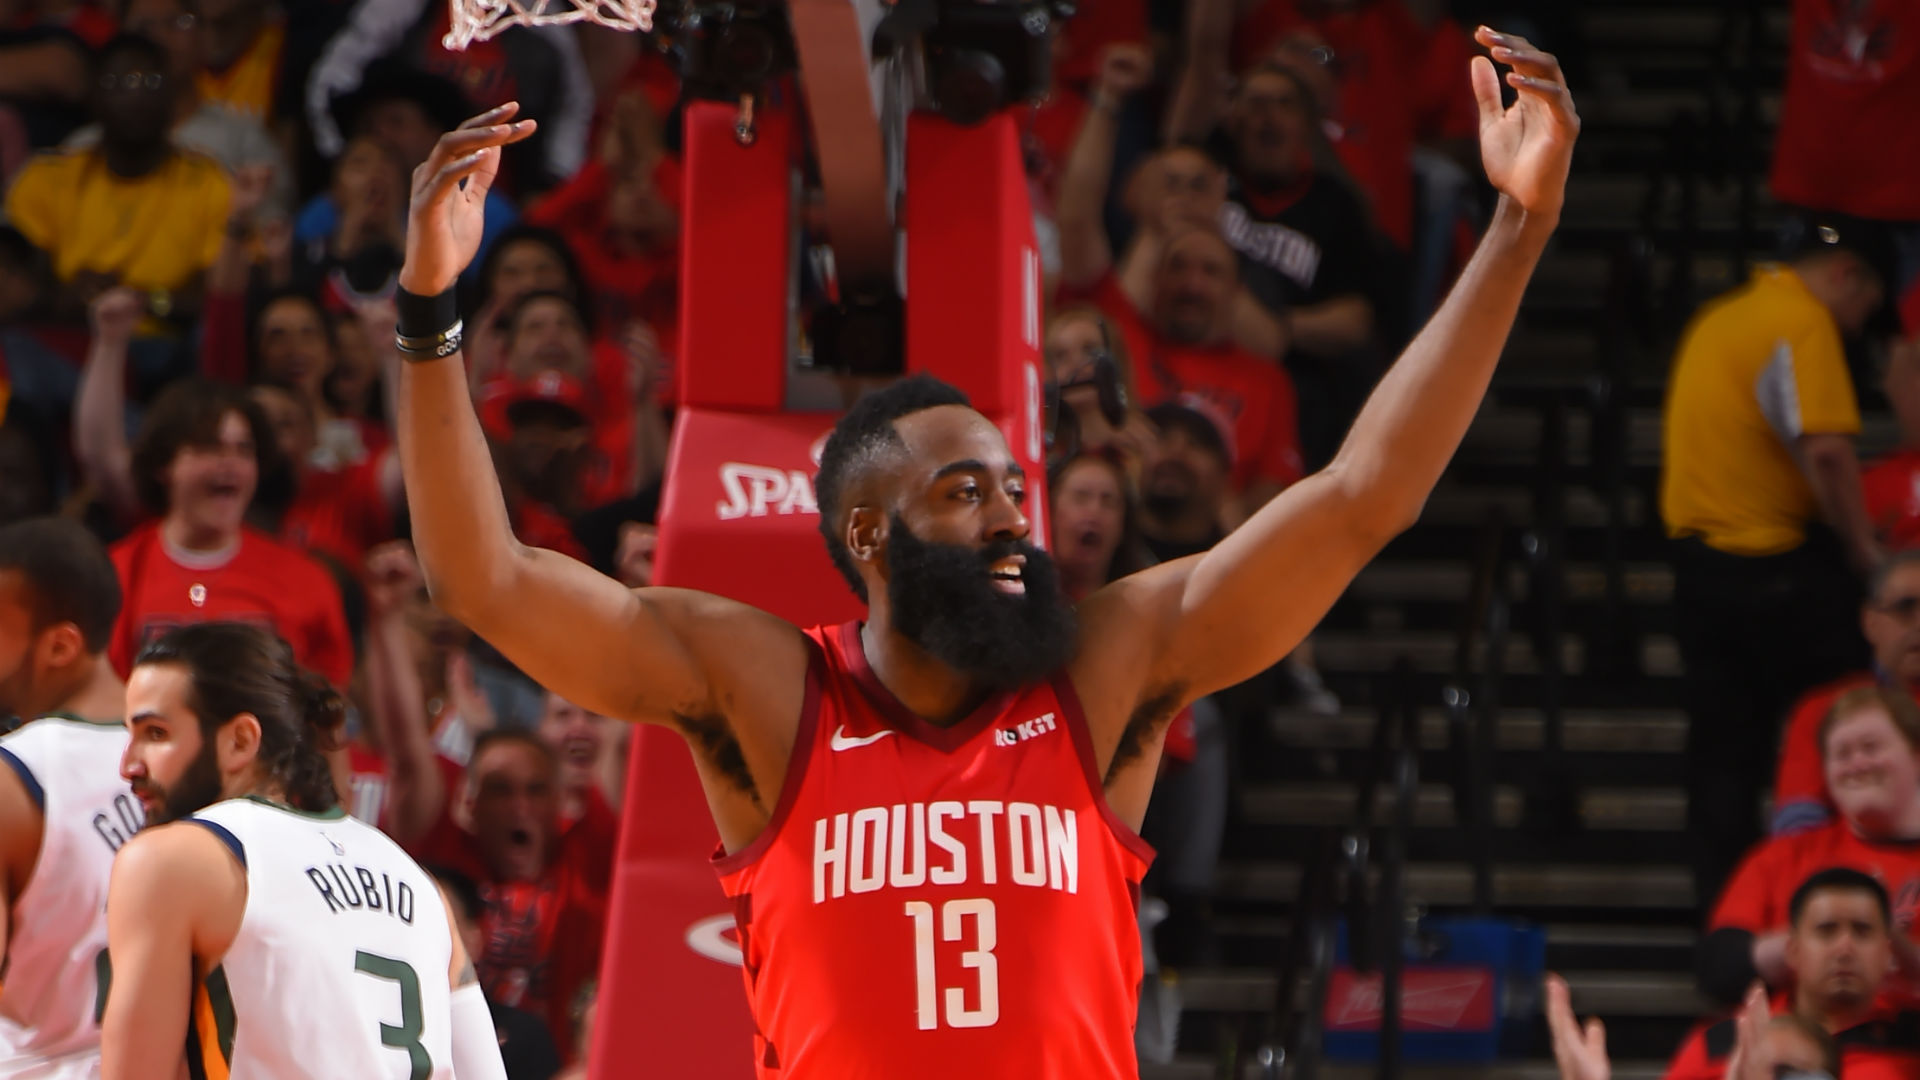 NBA Playoffs 2019: Scores and highlights from Rockets vs. Jazz, Blazers vs. Thunder ...1920 x 1080